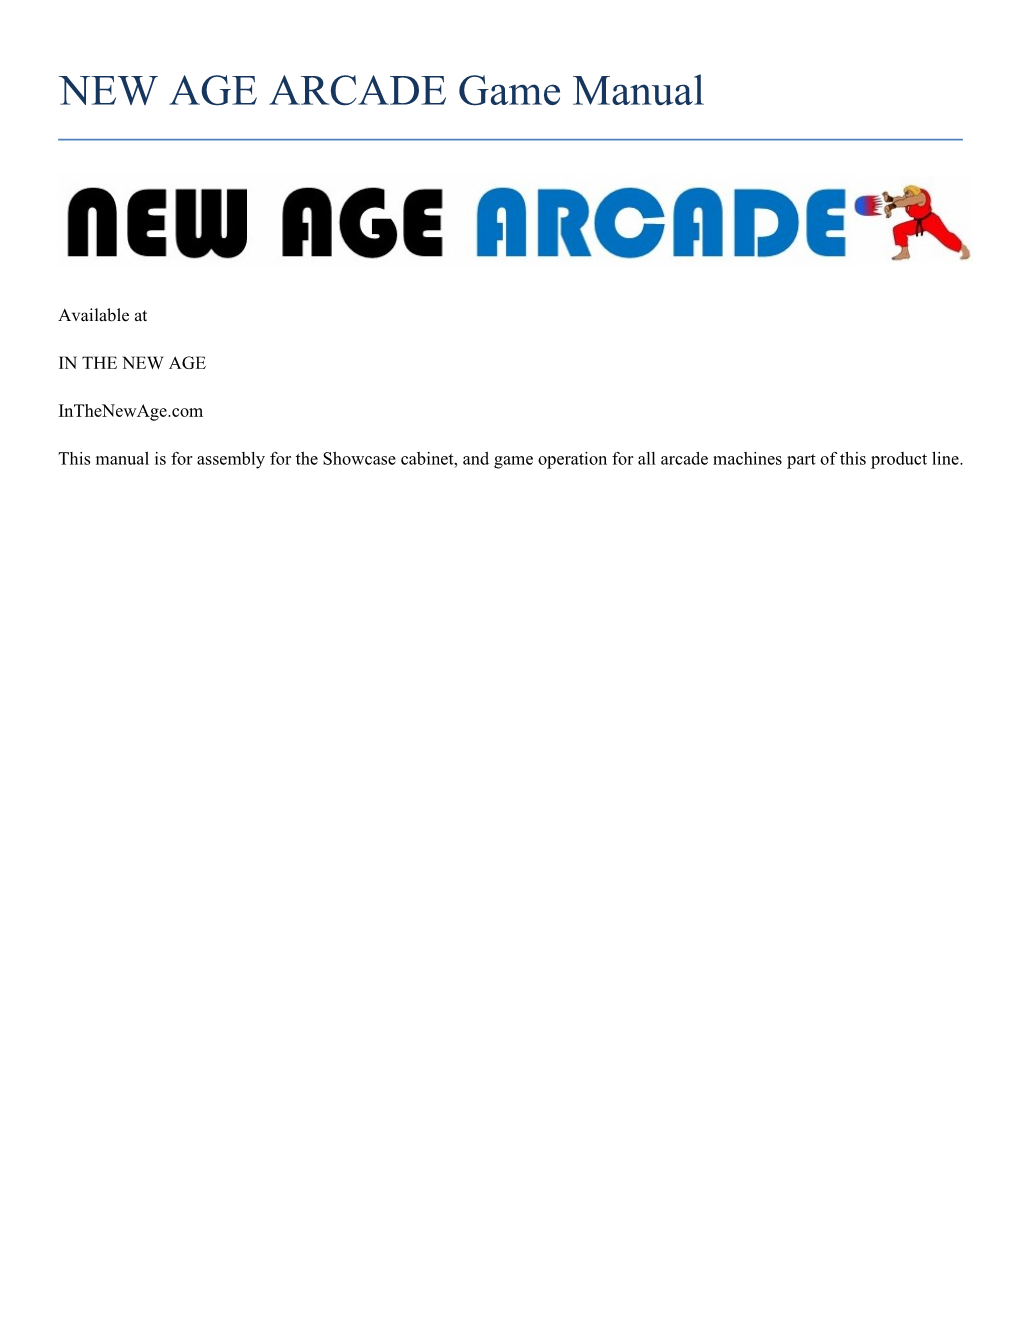 NEW AGE ARCADE Game Manual